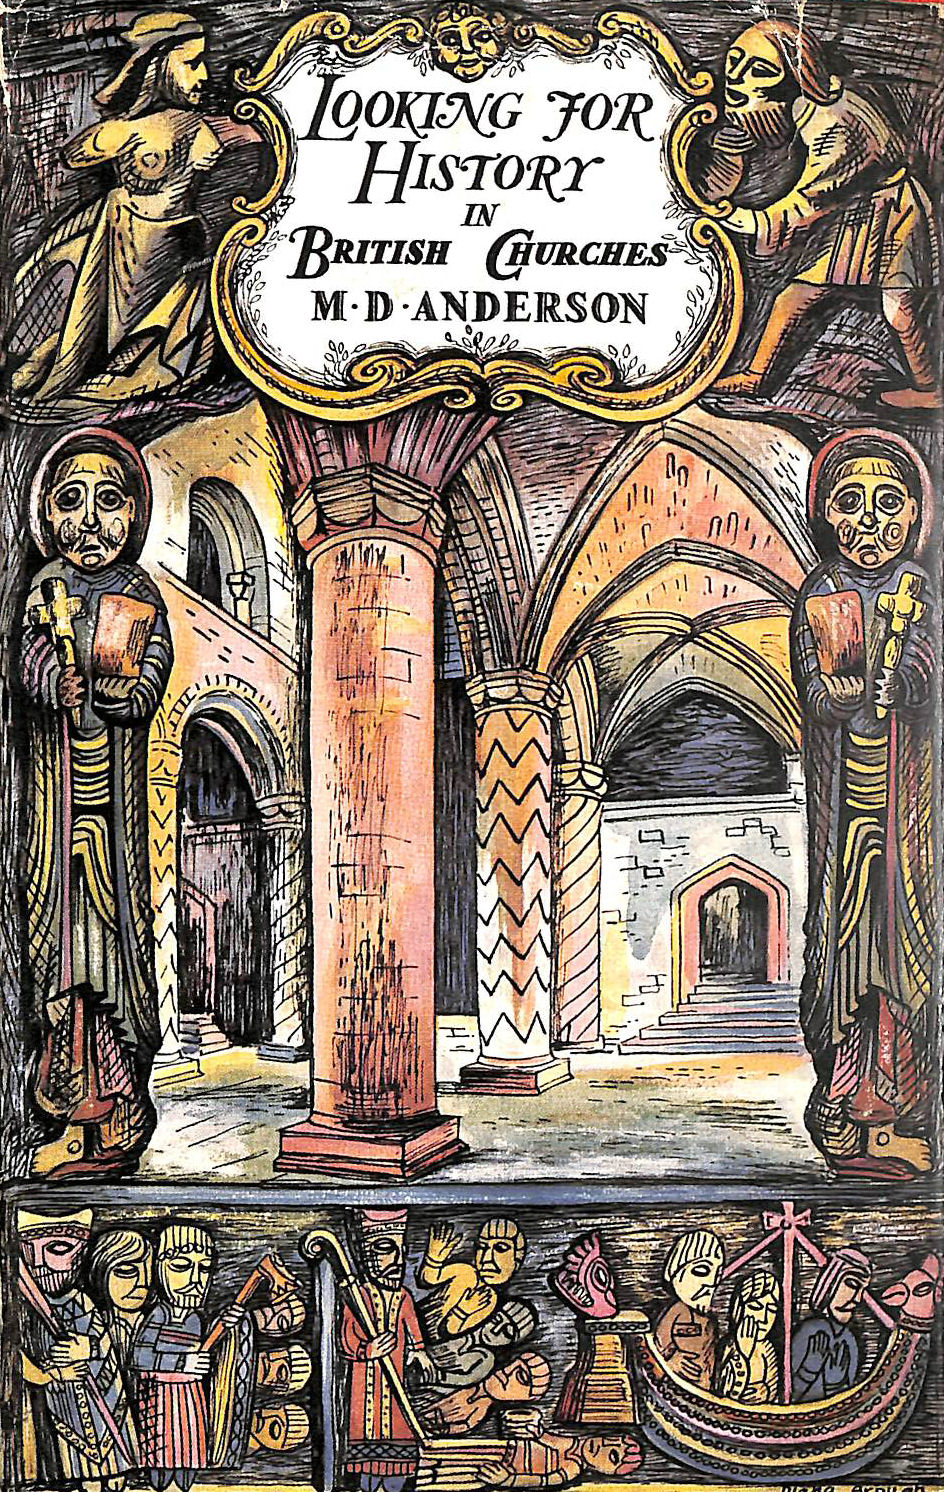 M D ANDERSON - Looking for history in British churches